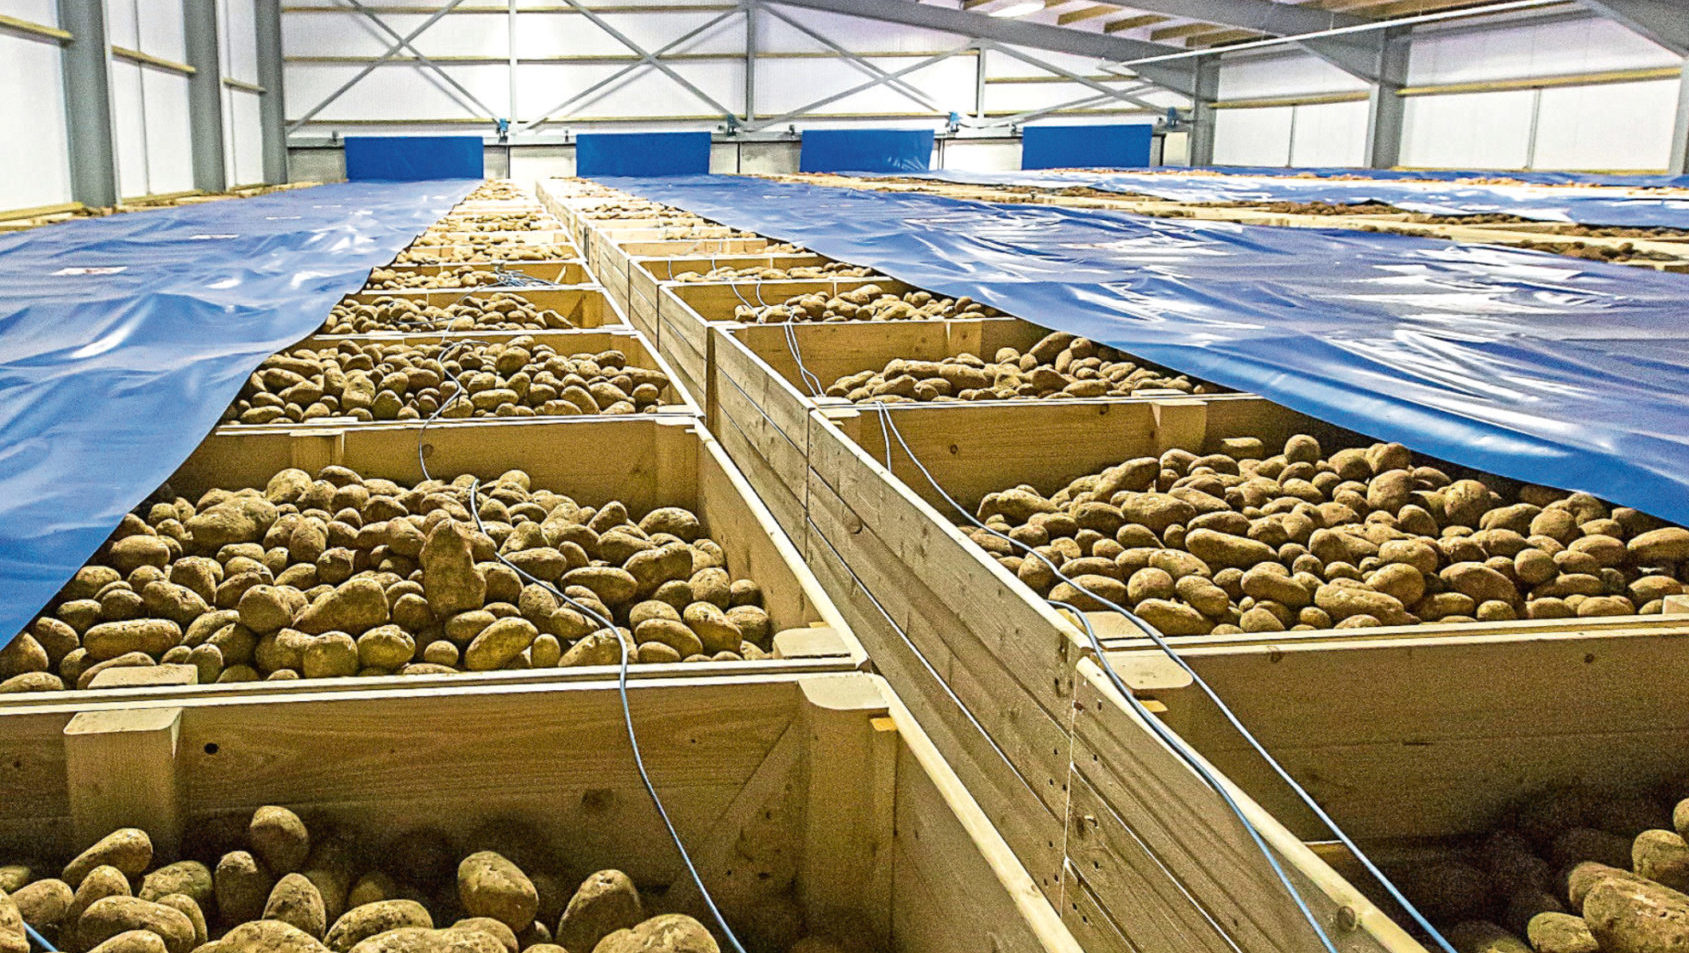 The versatility and value of potatoes will be highlighted in the campaign by AHDB.